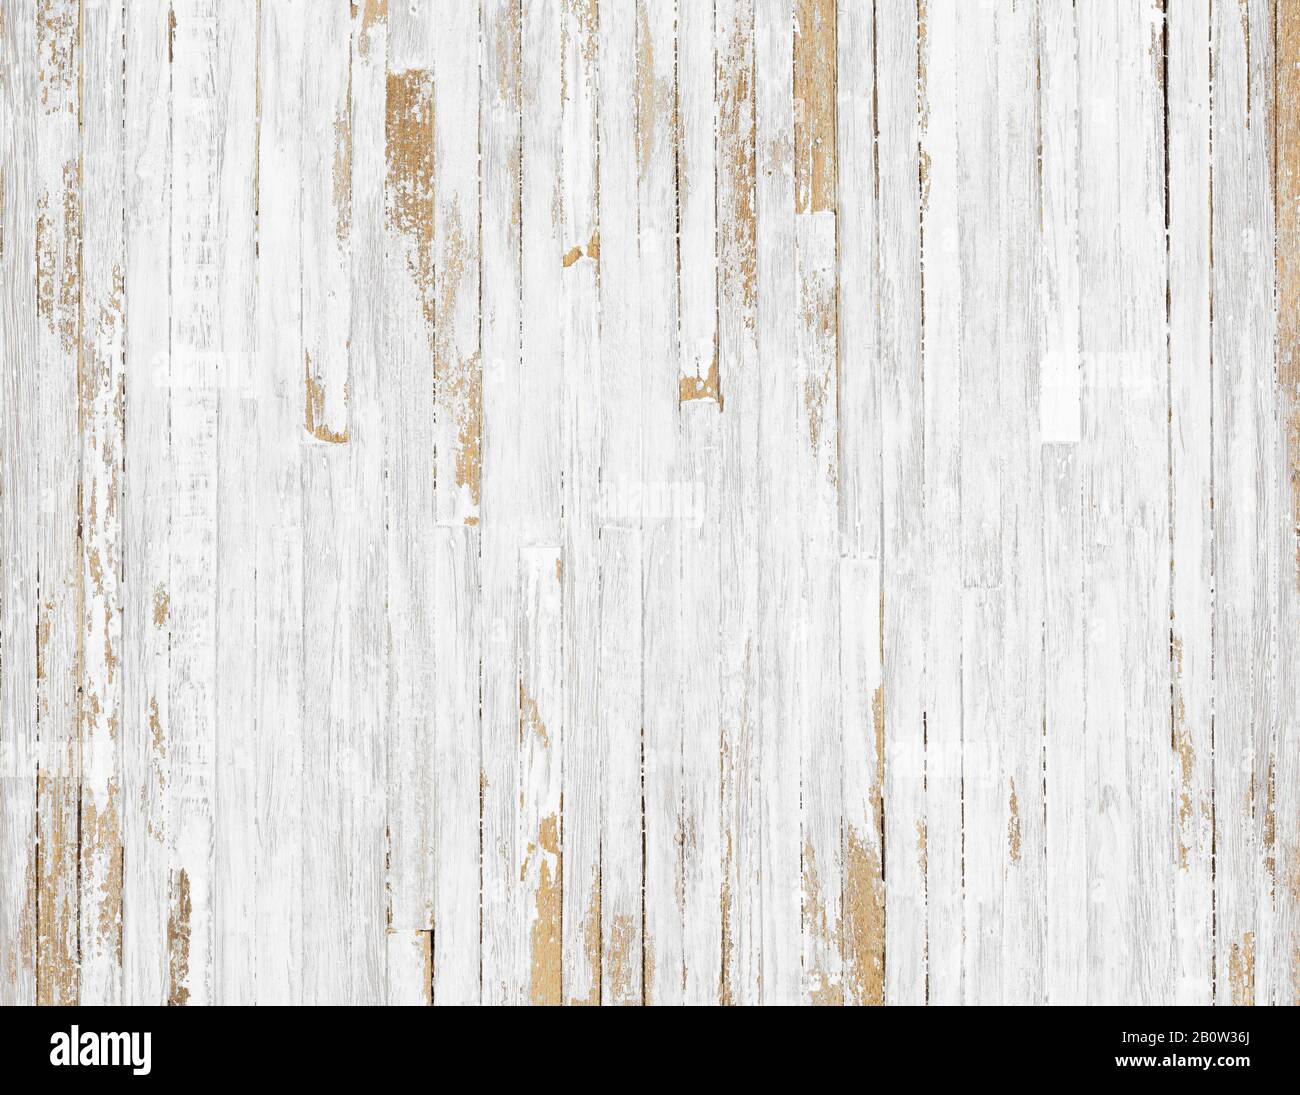 White rustic wood  texture background. top view background of light rusty wooden planks. Grunge  of weathered painted wooden plank. Stock Photo